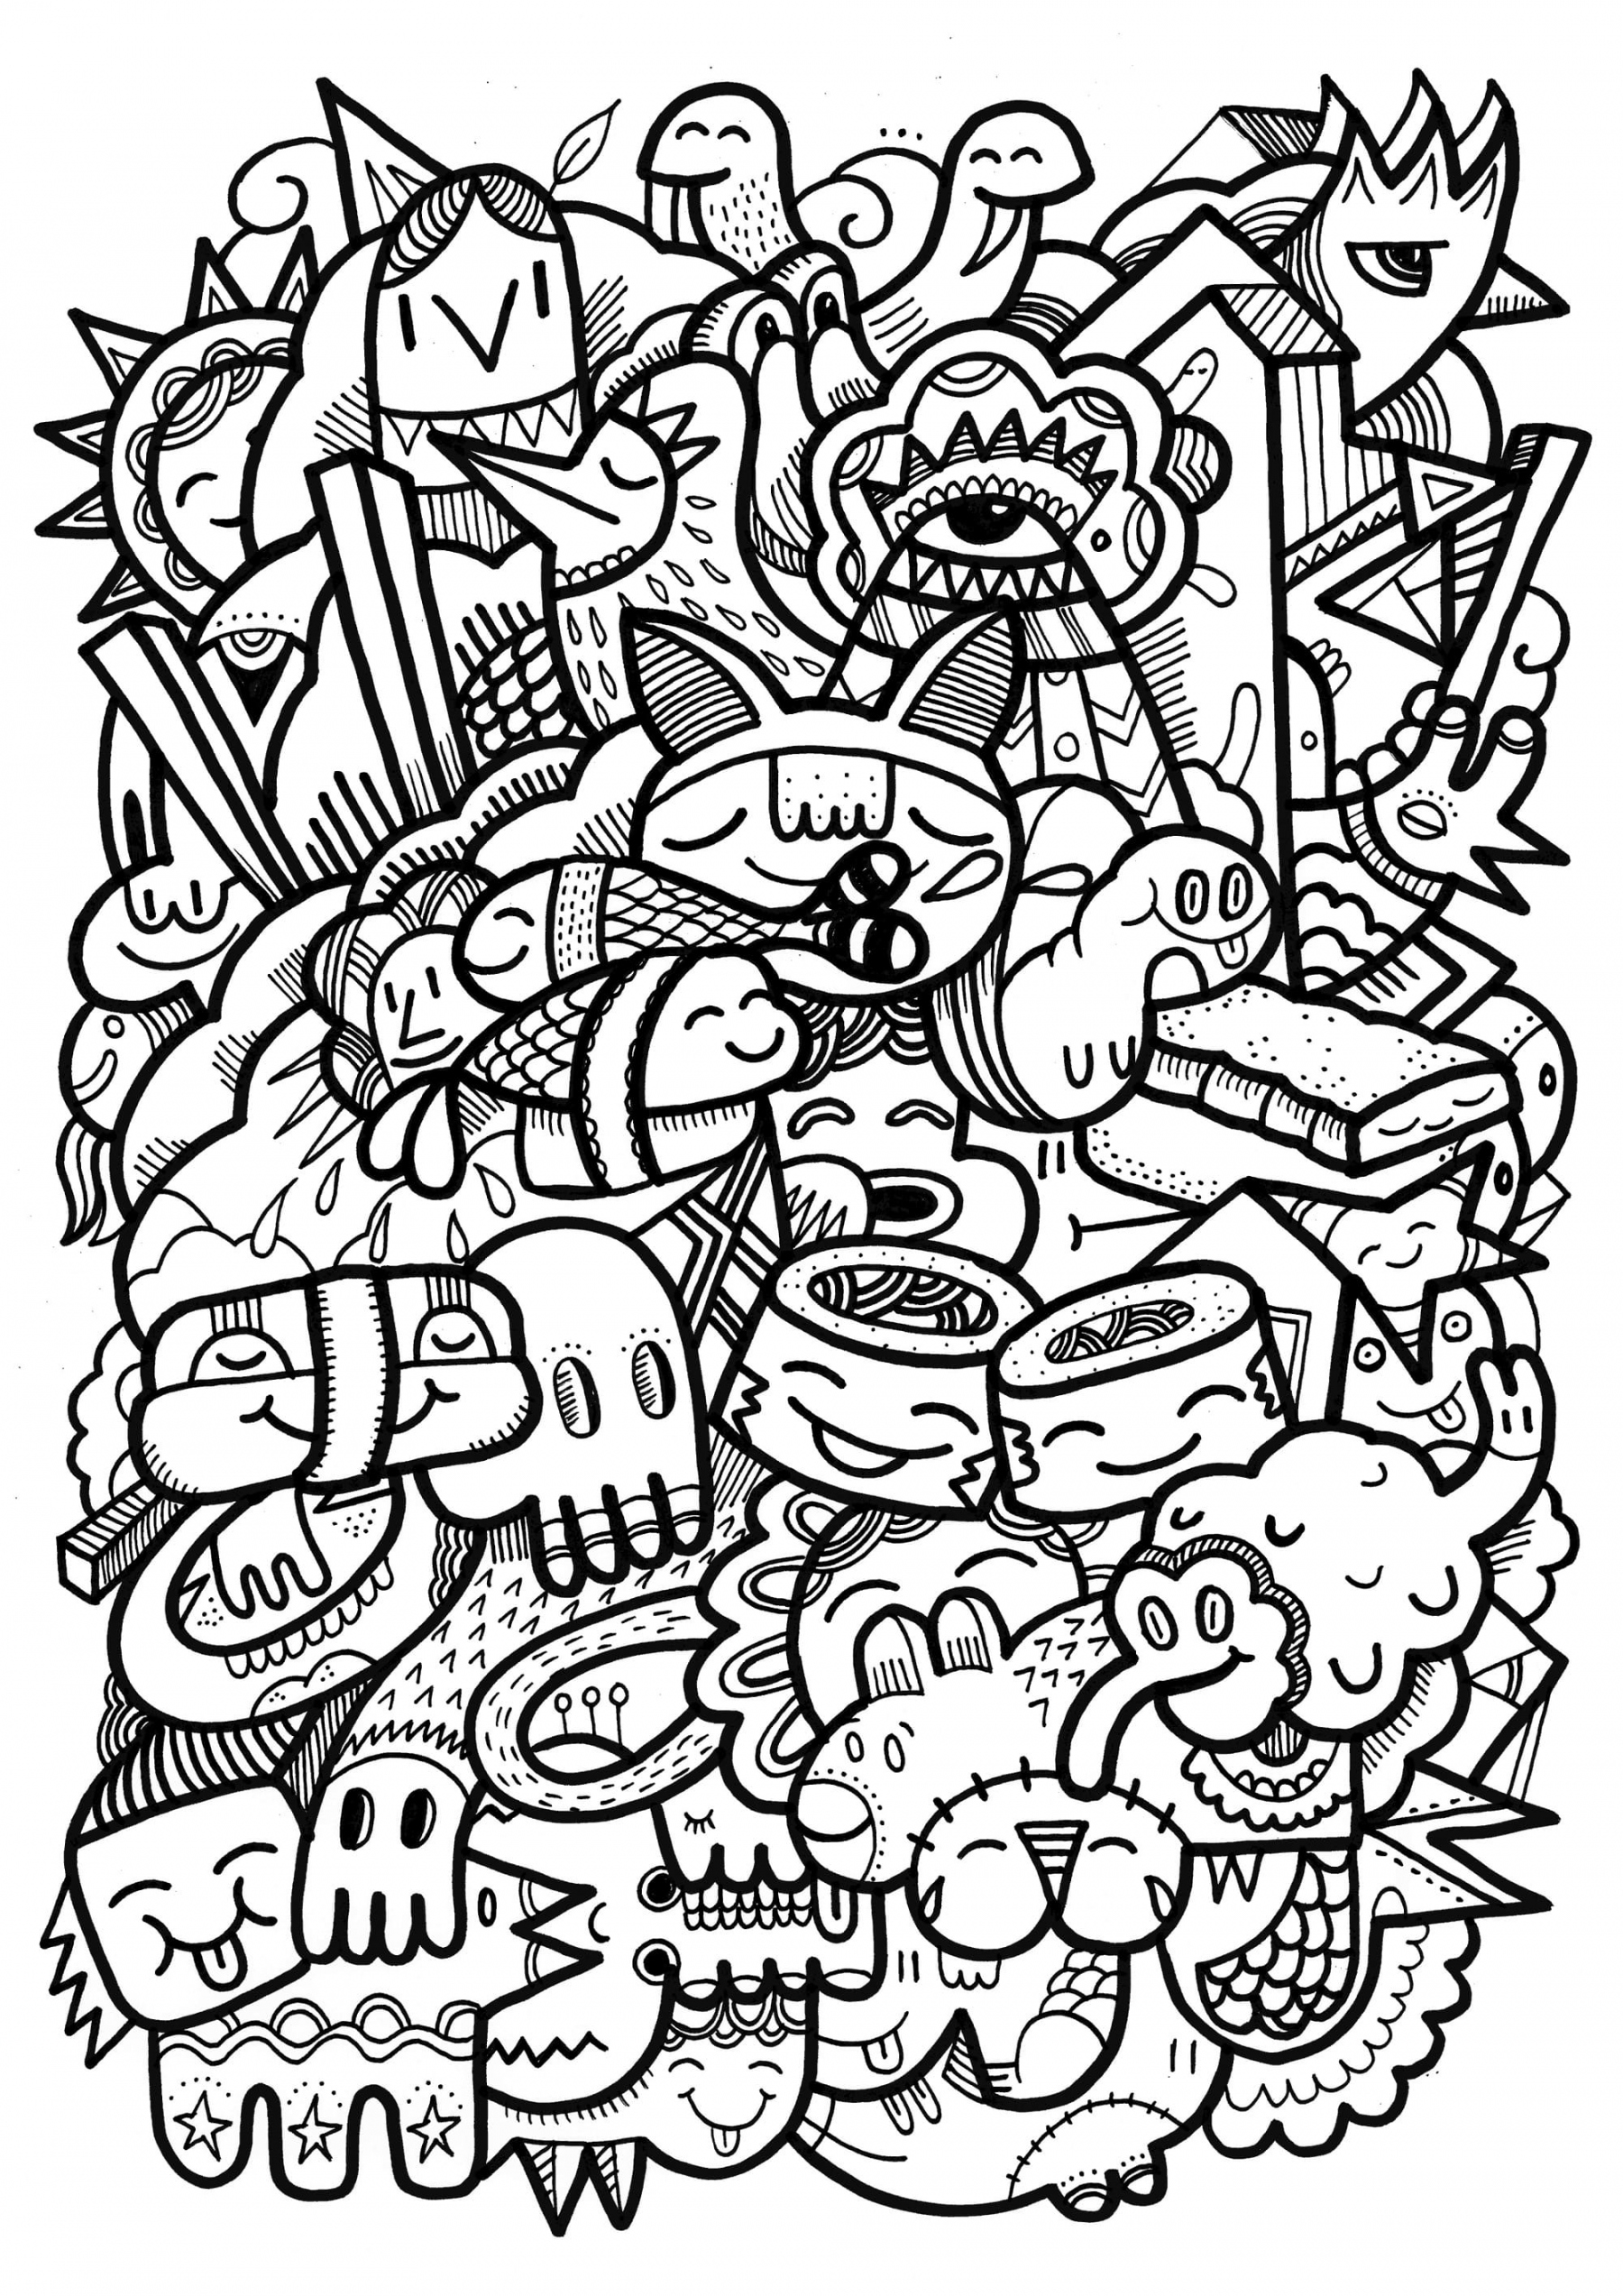 Graffiti Coloring Pages   Pictures Free Printable - FREE Printables - Free Printable Street Art Graffiti Coloring Pages